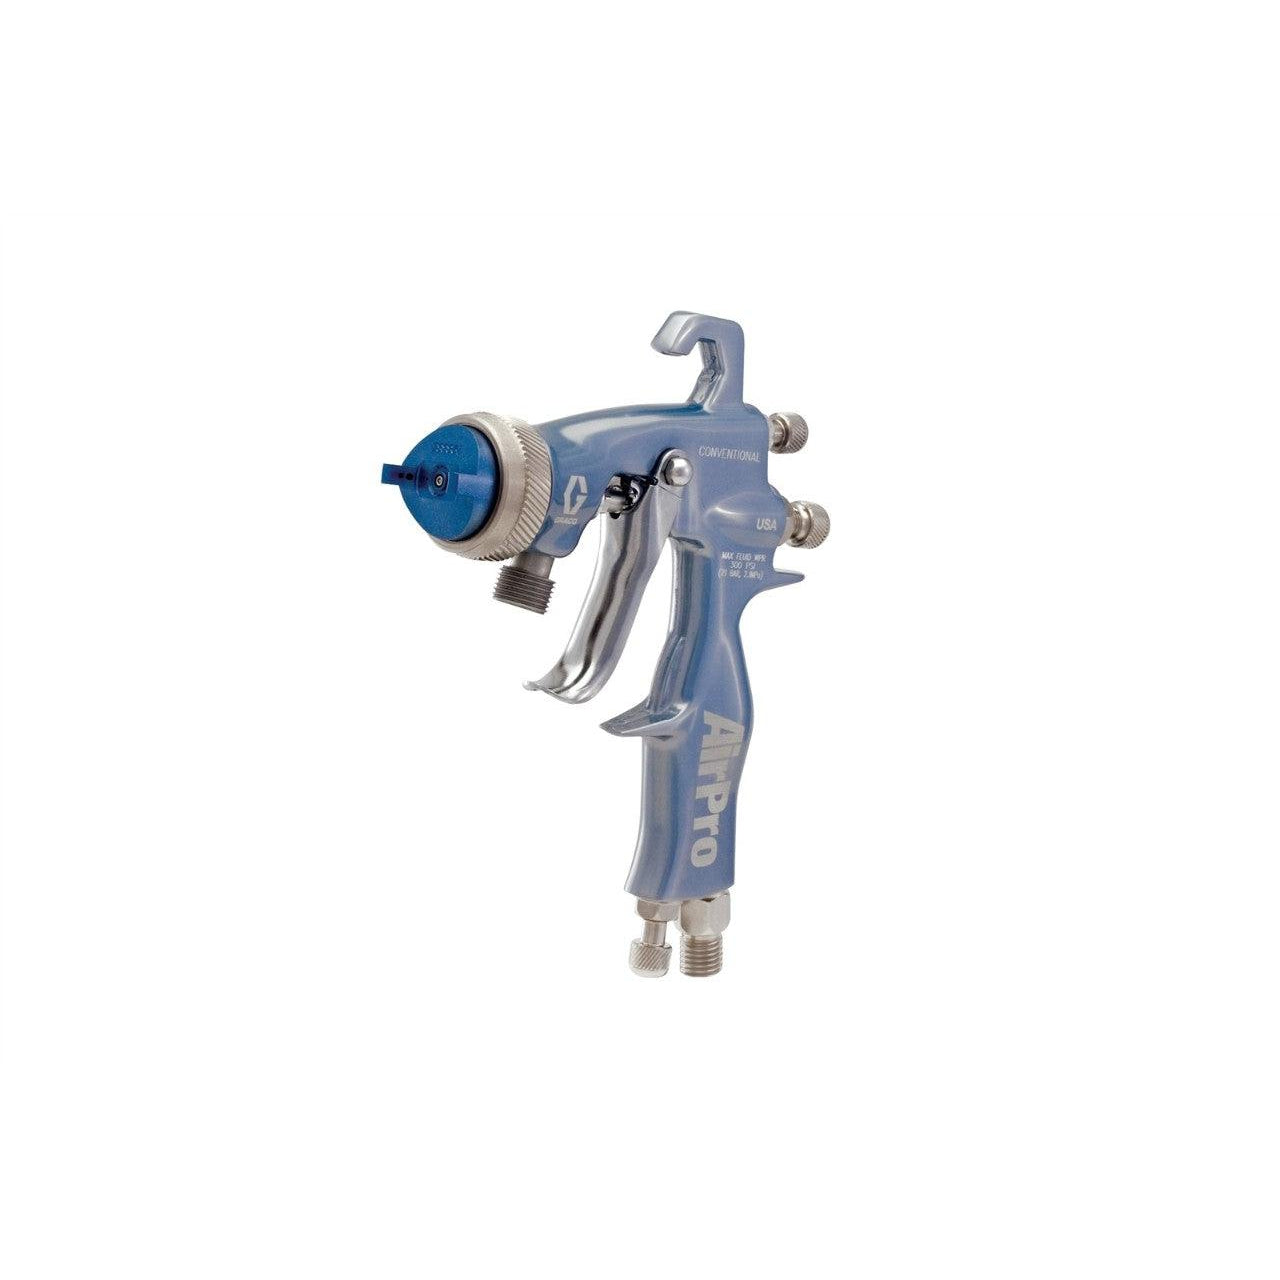 AirPro Air Spray Pressure Feed Gun, Conventional, 0.051 inch (1.3 mm) Nozzle, for Adhesive Applications